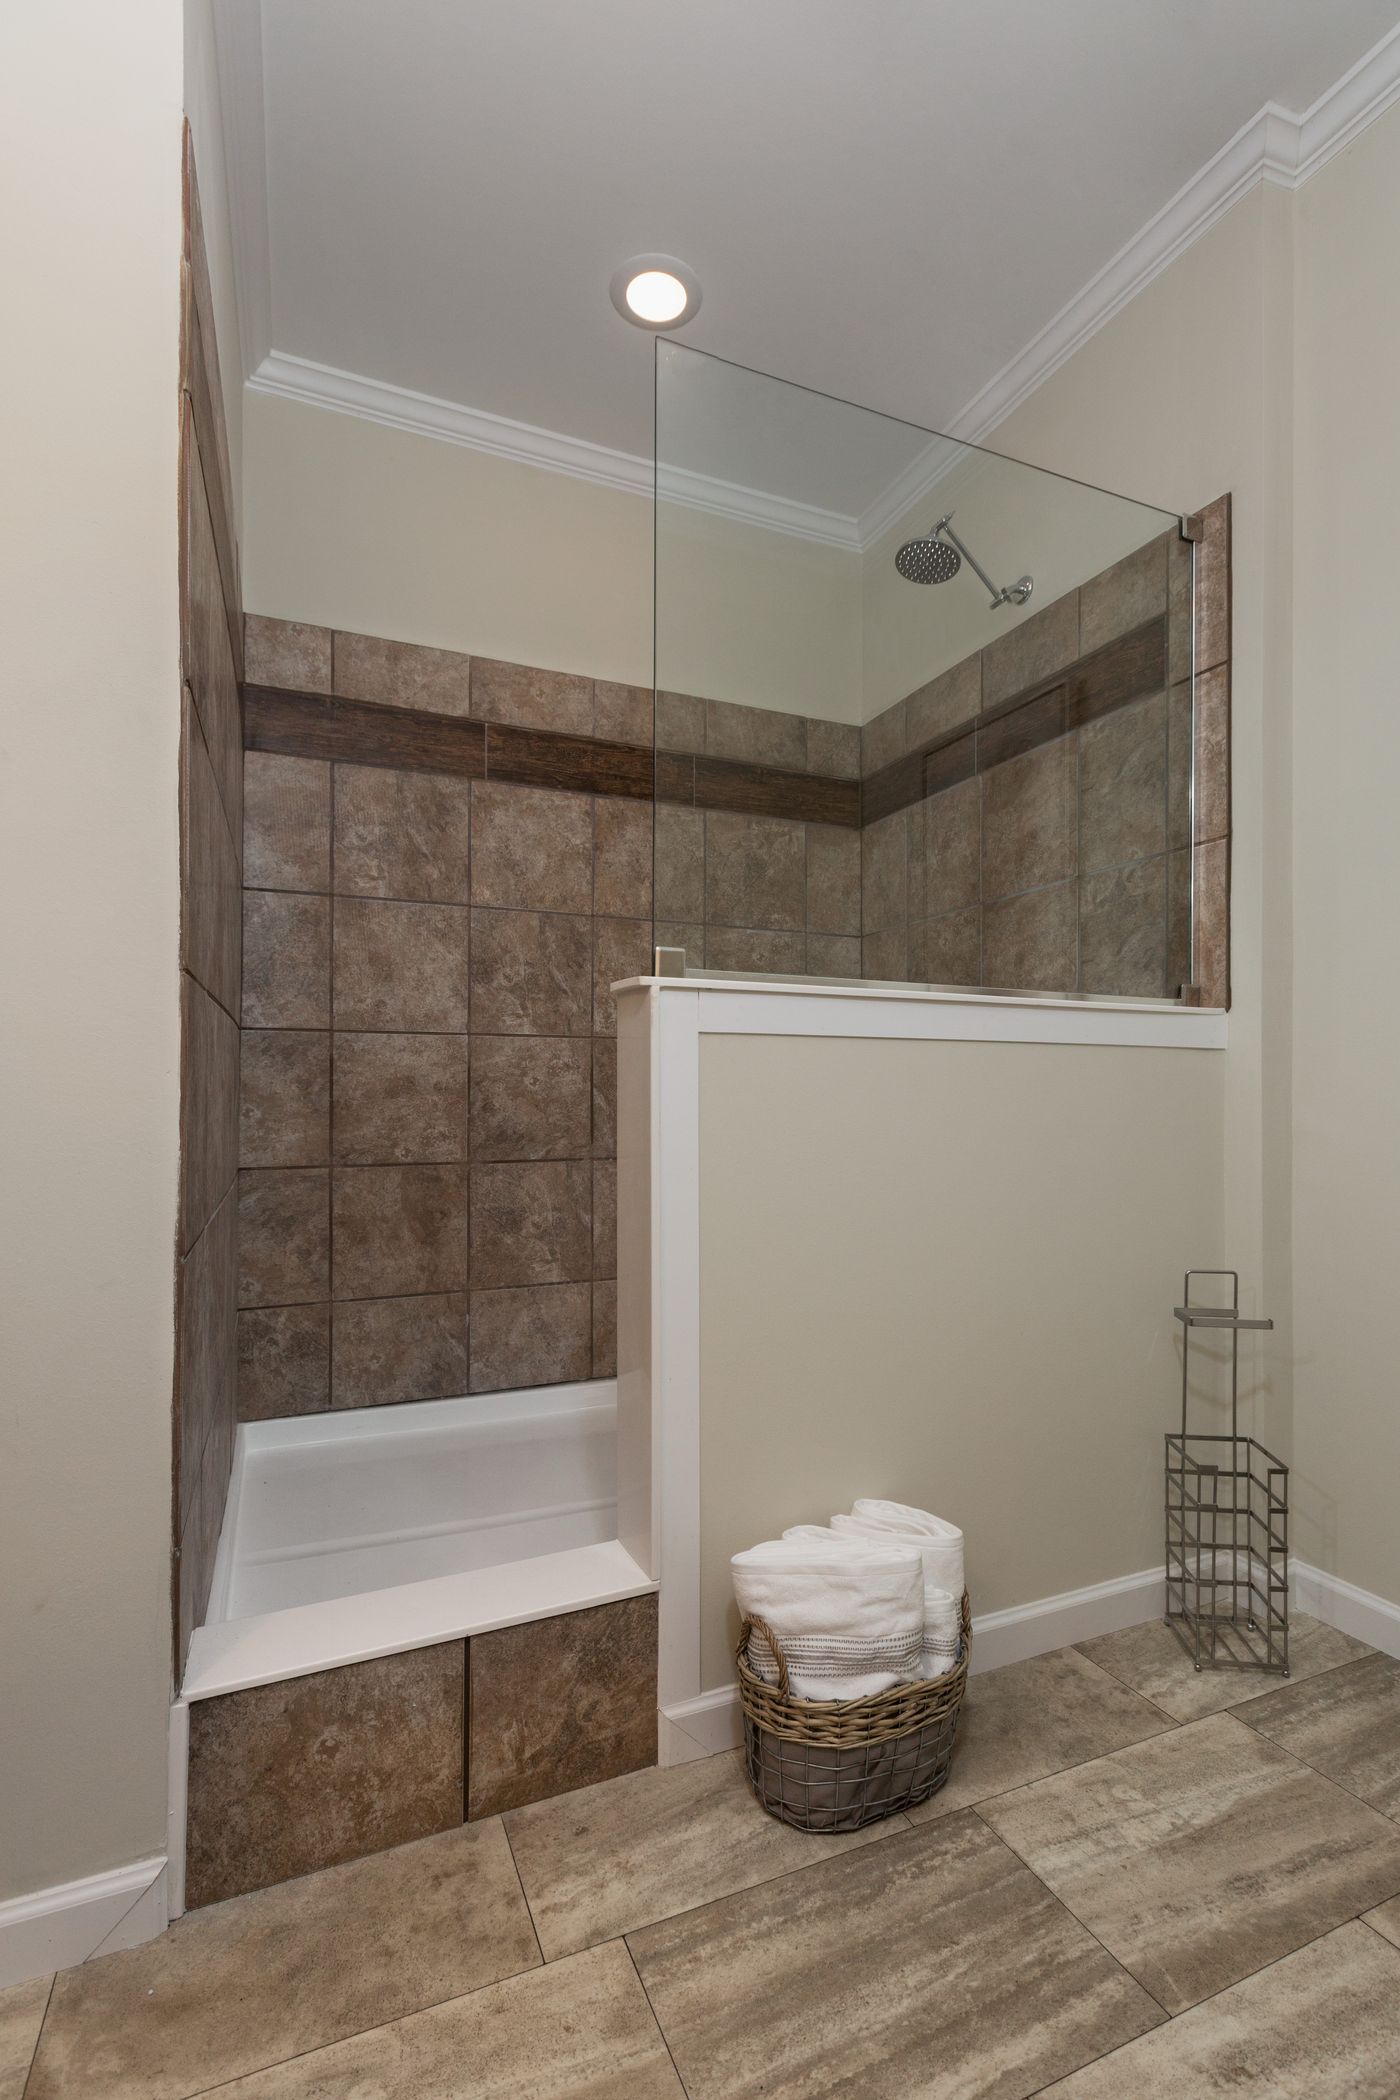 The KENNESAW ELITE Primary Bathroom. This Manufactured Mobile Home features 4 bedrooms and 2 baths.